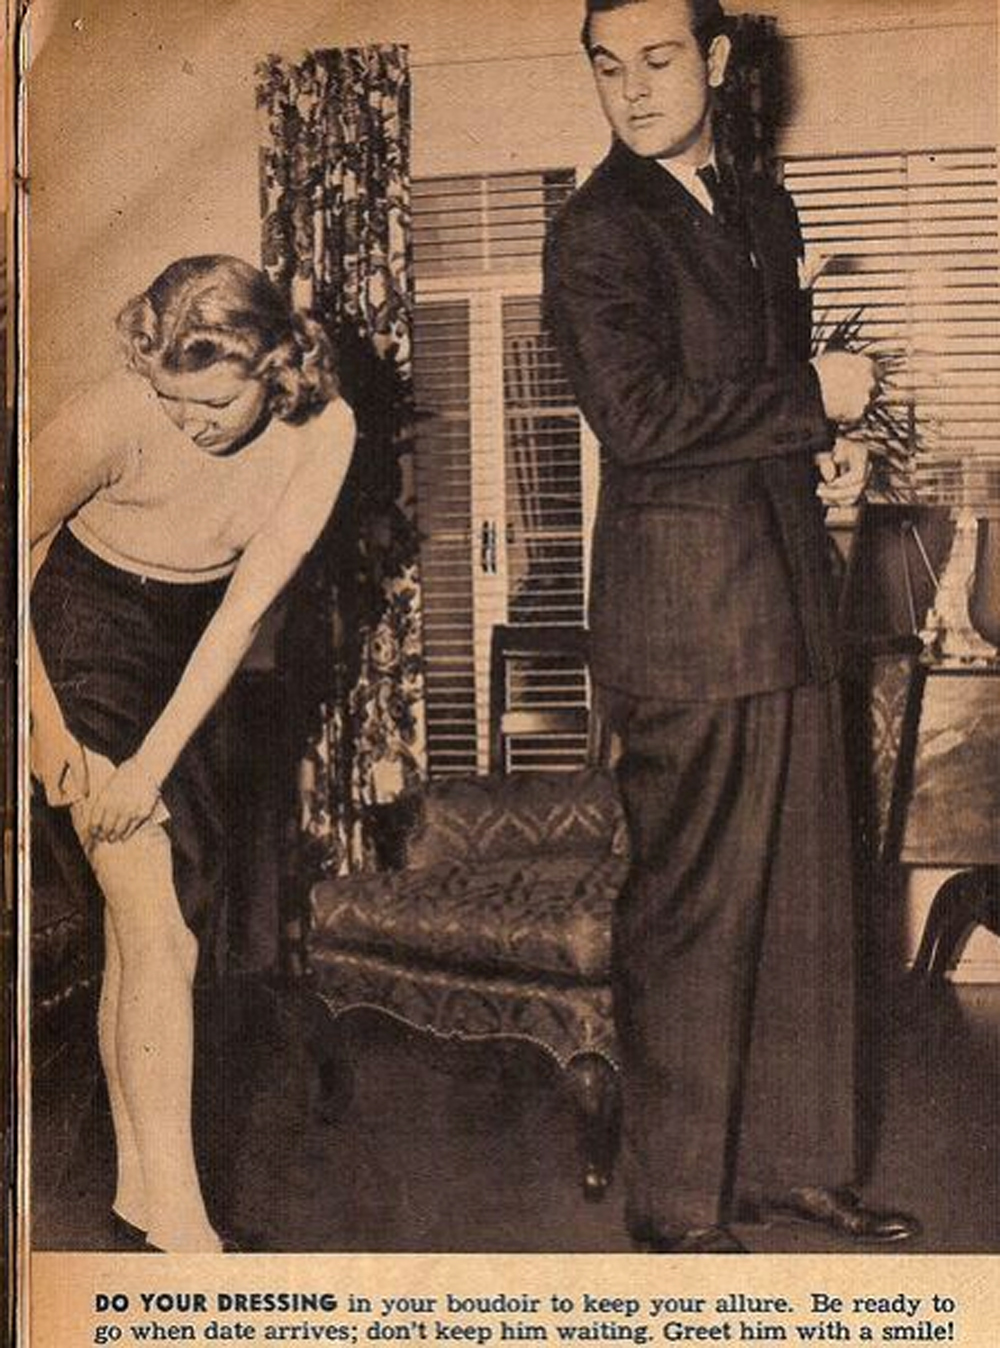 13 Dating Tips For Women From The 1930s That Are Hilarious Now